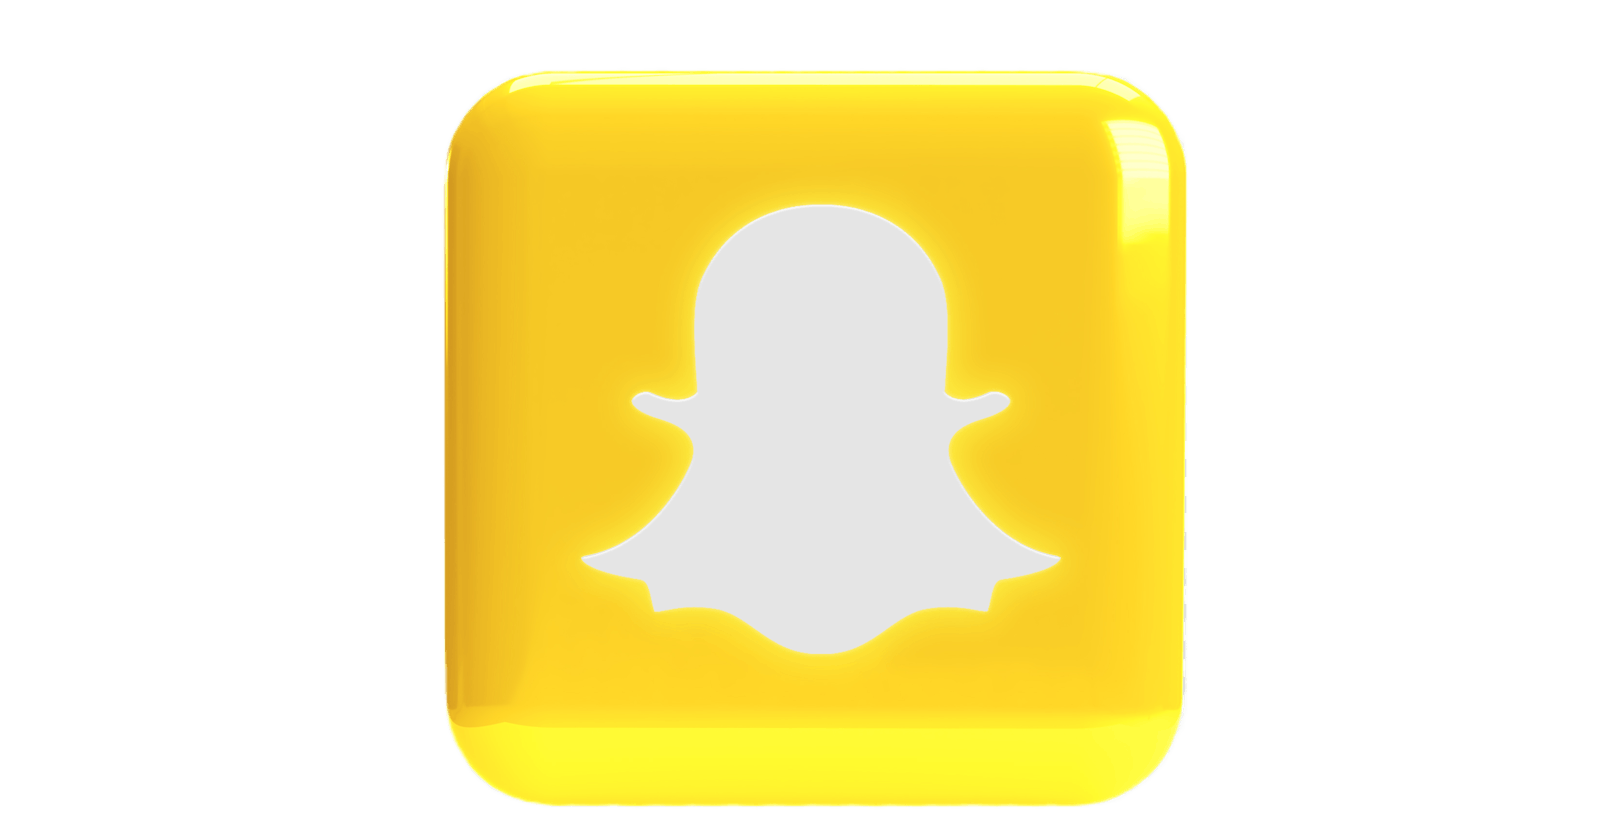 How to use the Snapchat application on mobile